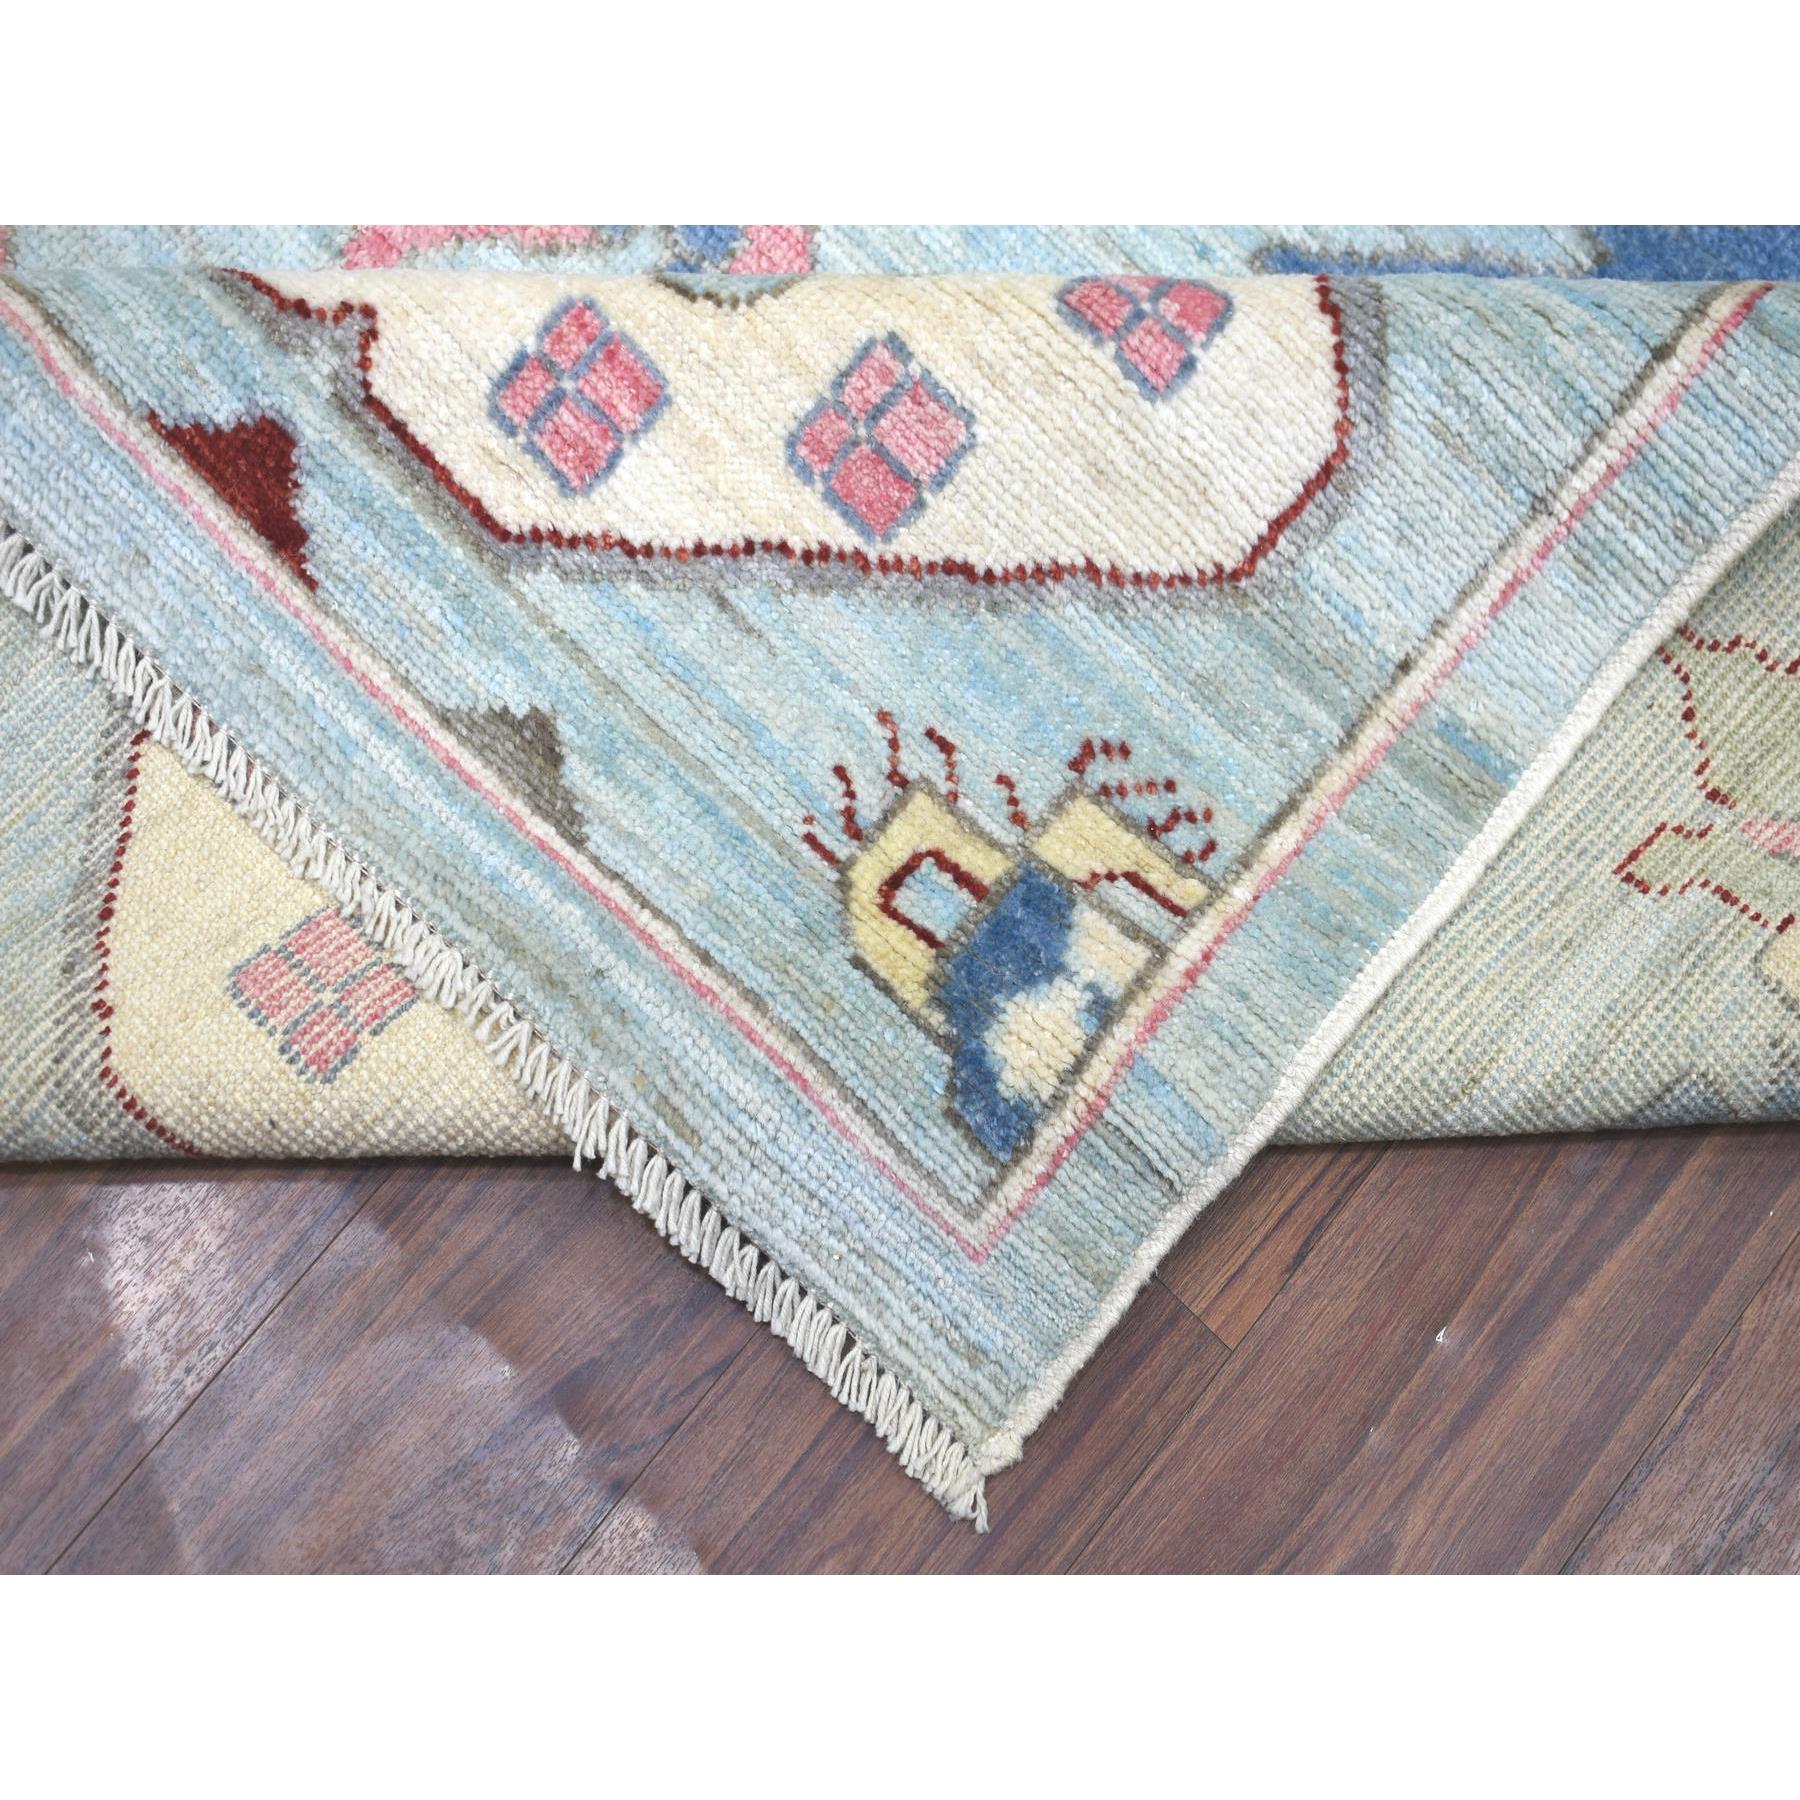 8'10"x11'8" Light Blue, Anatolian Design with Large Elements and Bird Figurines Natural Dyes, Soft and Supple Wool Hand Woven, Oriental Rug 